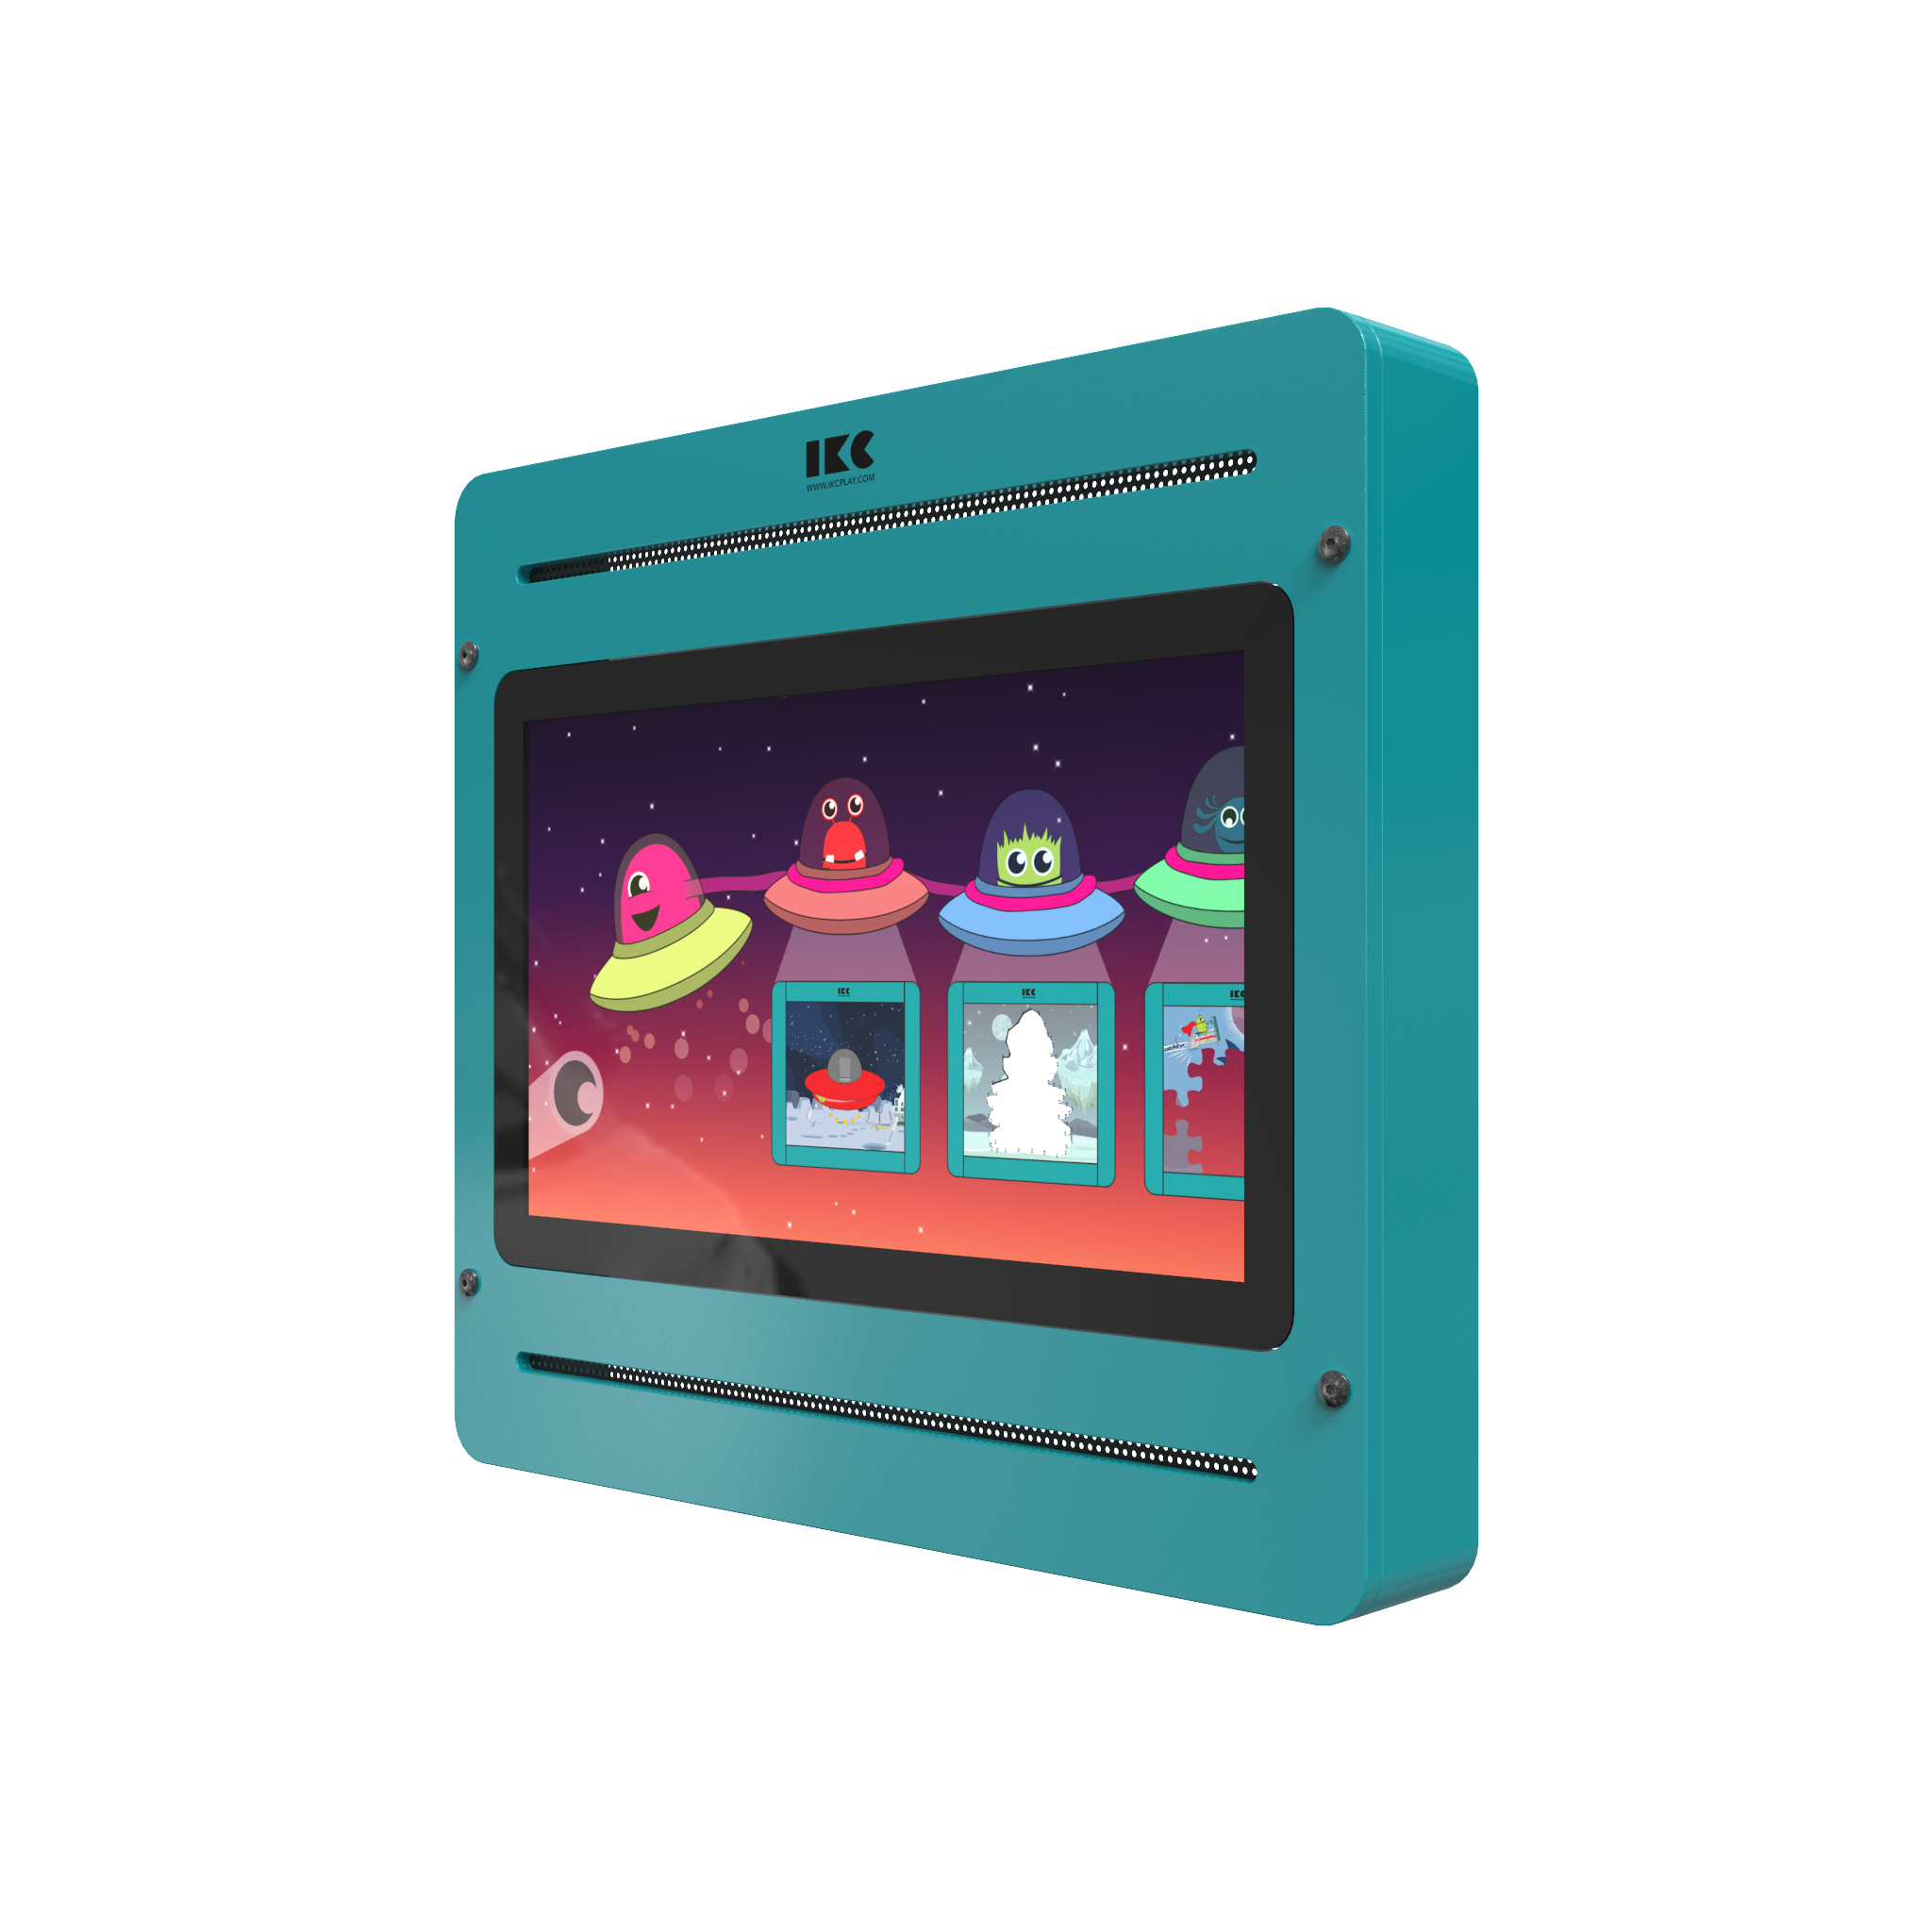 This image shows an interactive play system Delta 21 inch Monster